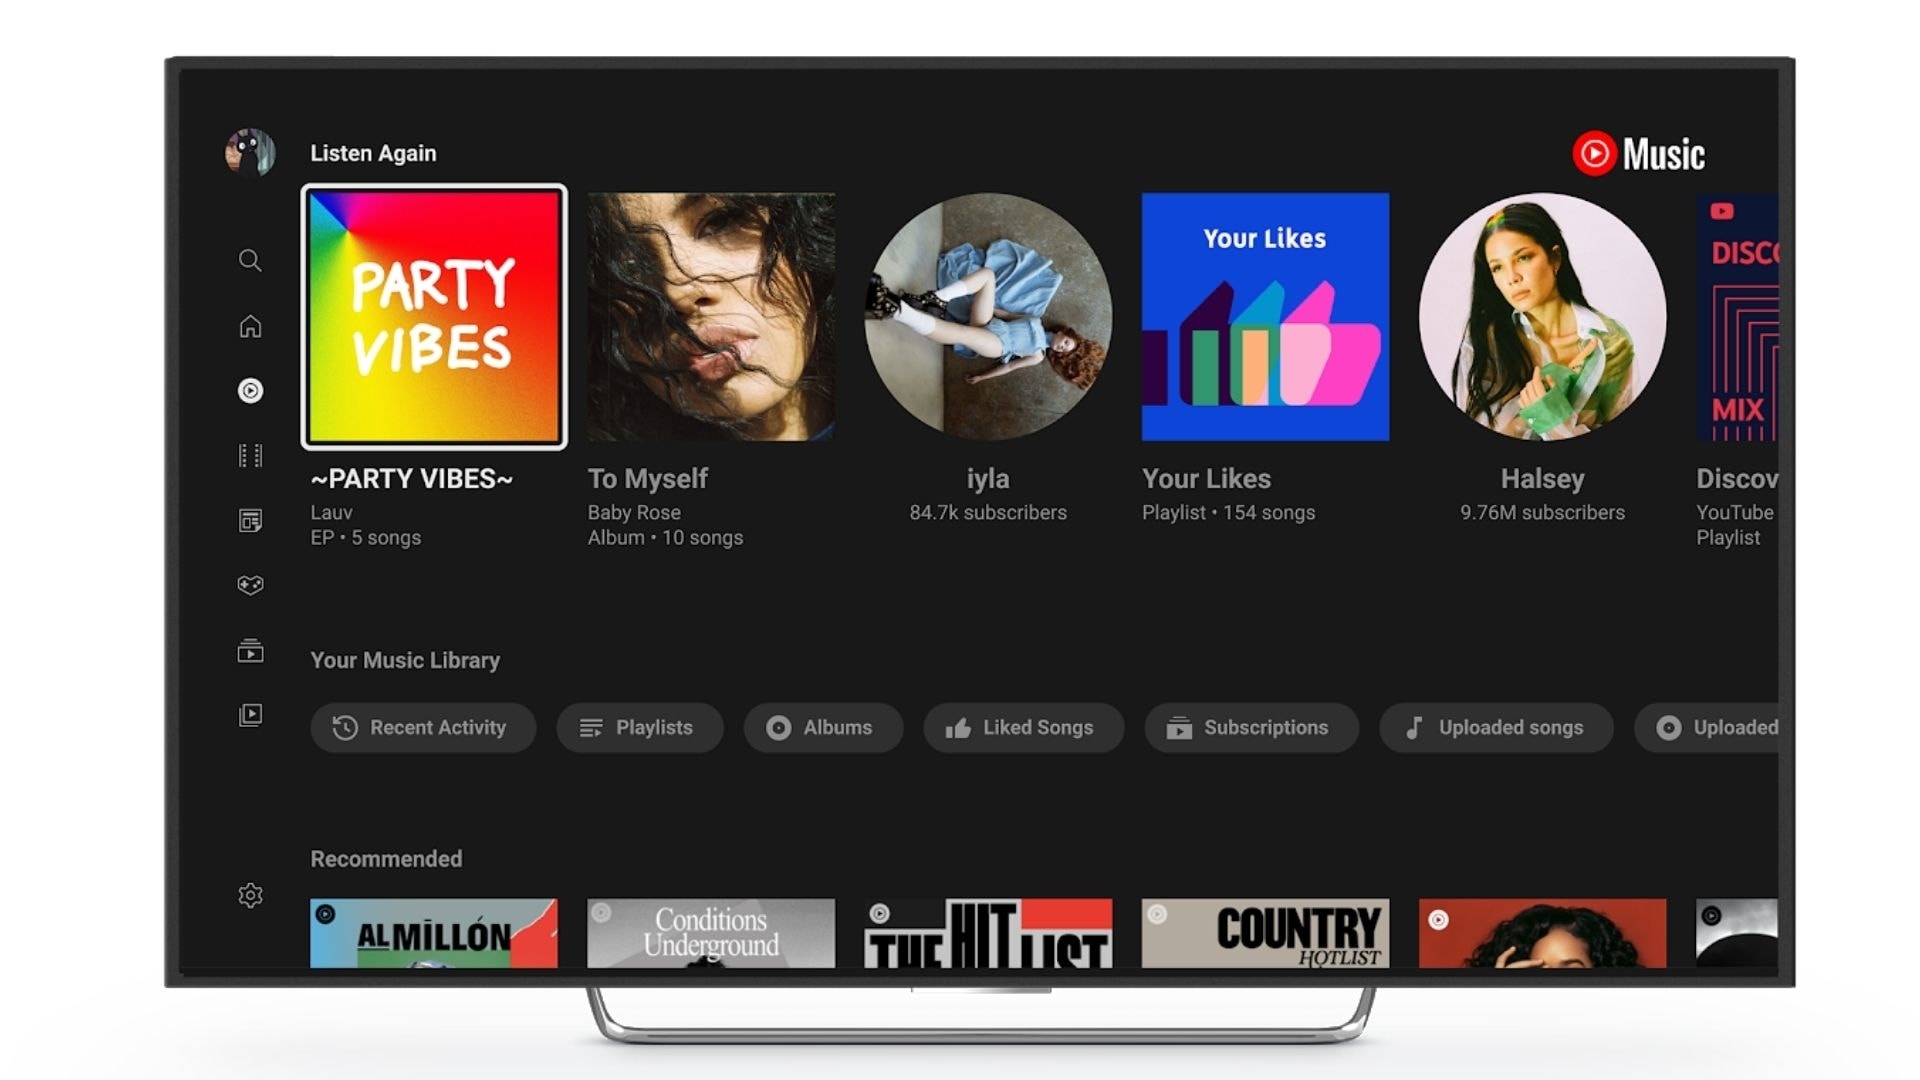 Youtube Music For Android Tv Gets New Features Apple Watch App Introduced